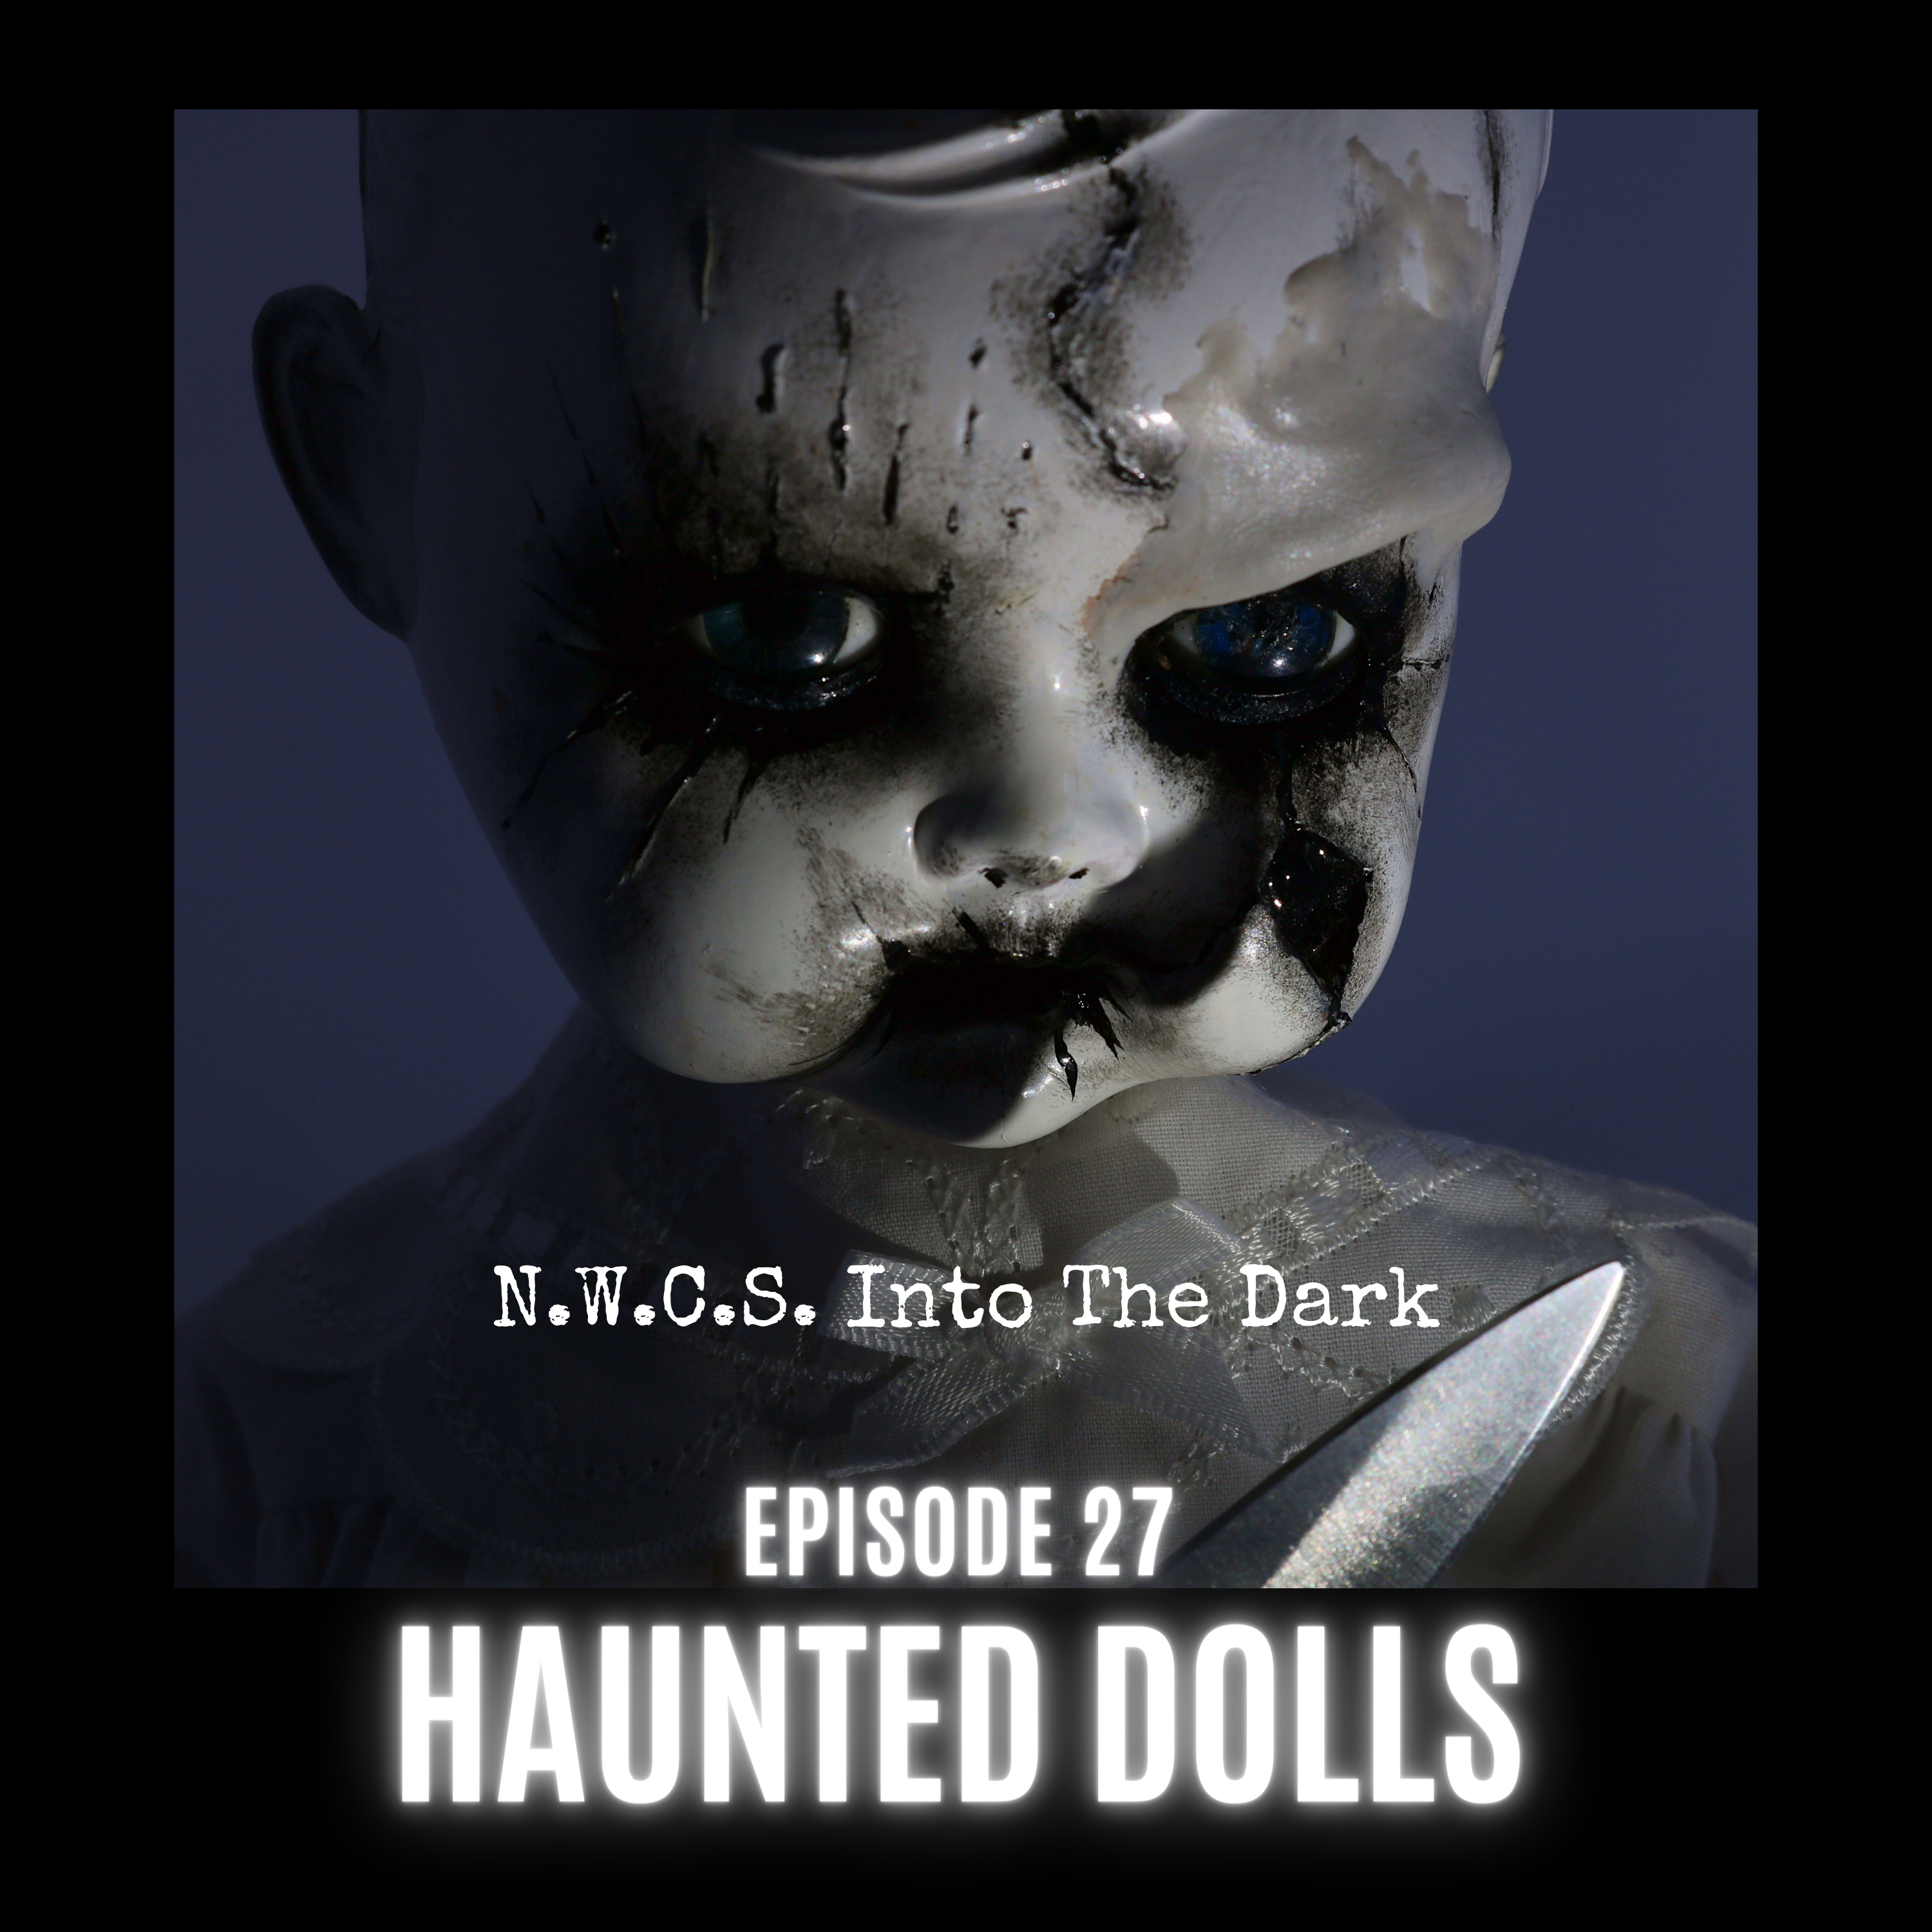 NWCS - Into The Dark Episode 27 Haunted Dolls